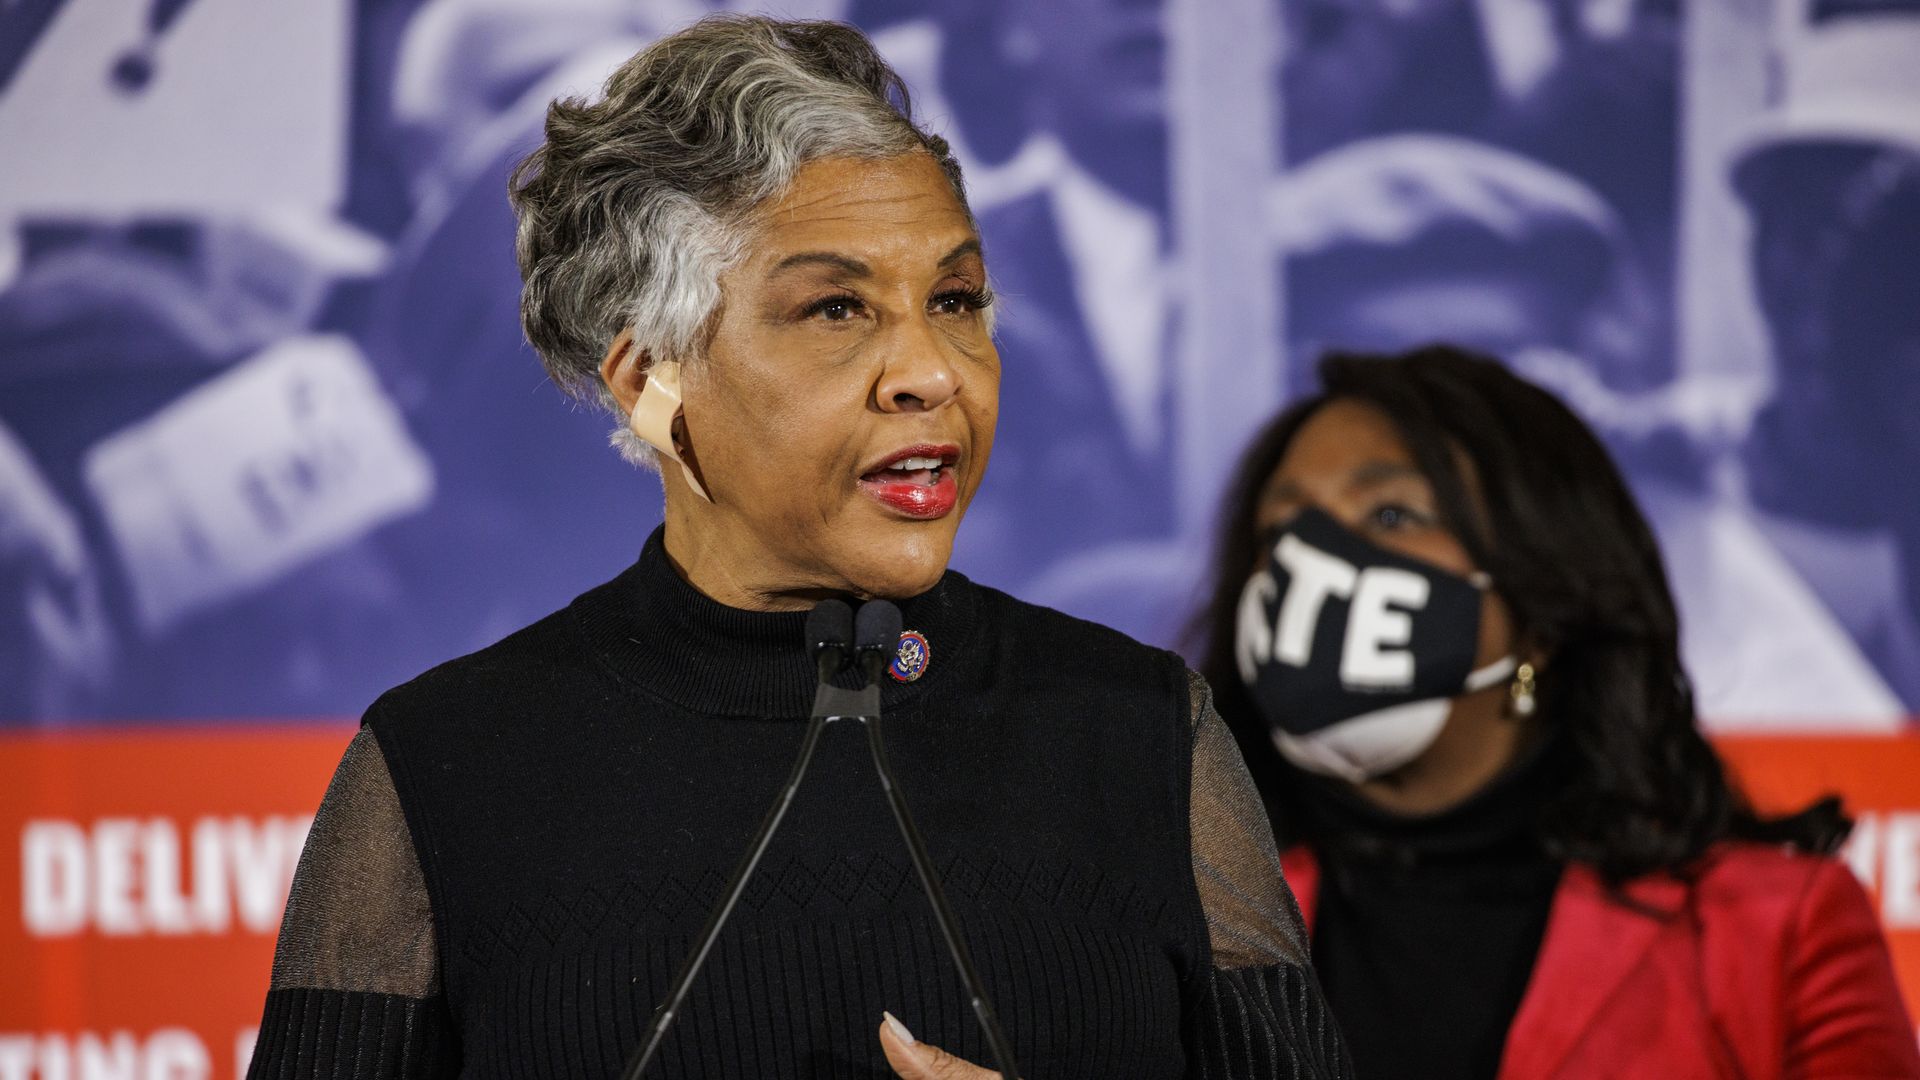 Rep. Joyce Beatty (D-OH) speaks during a press conference at Union Station on Martin Luther King Jr. Day on January 17, 2022